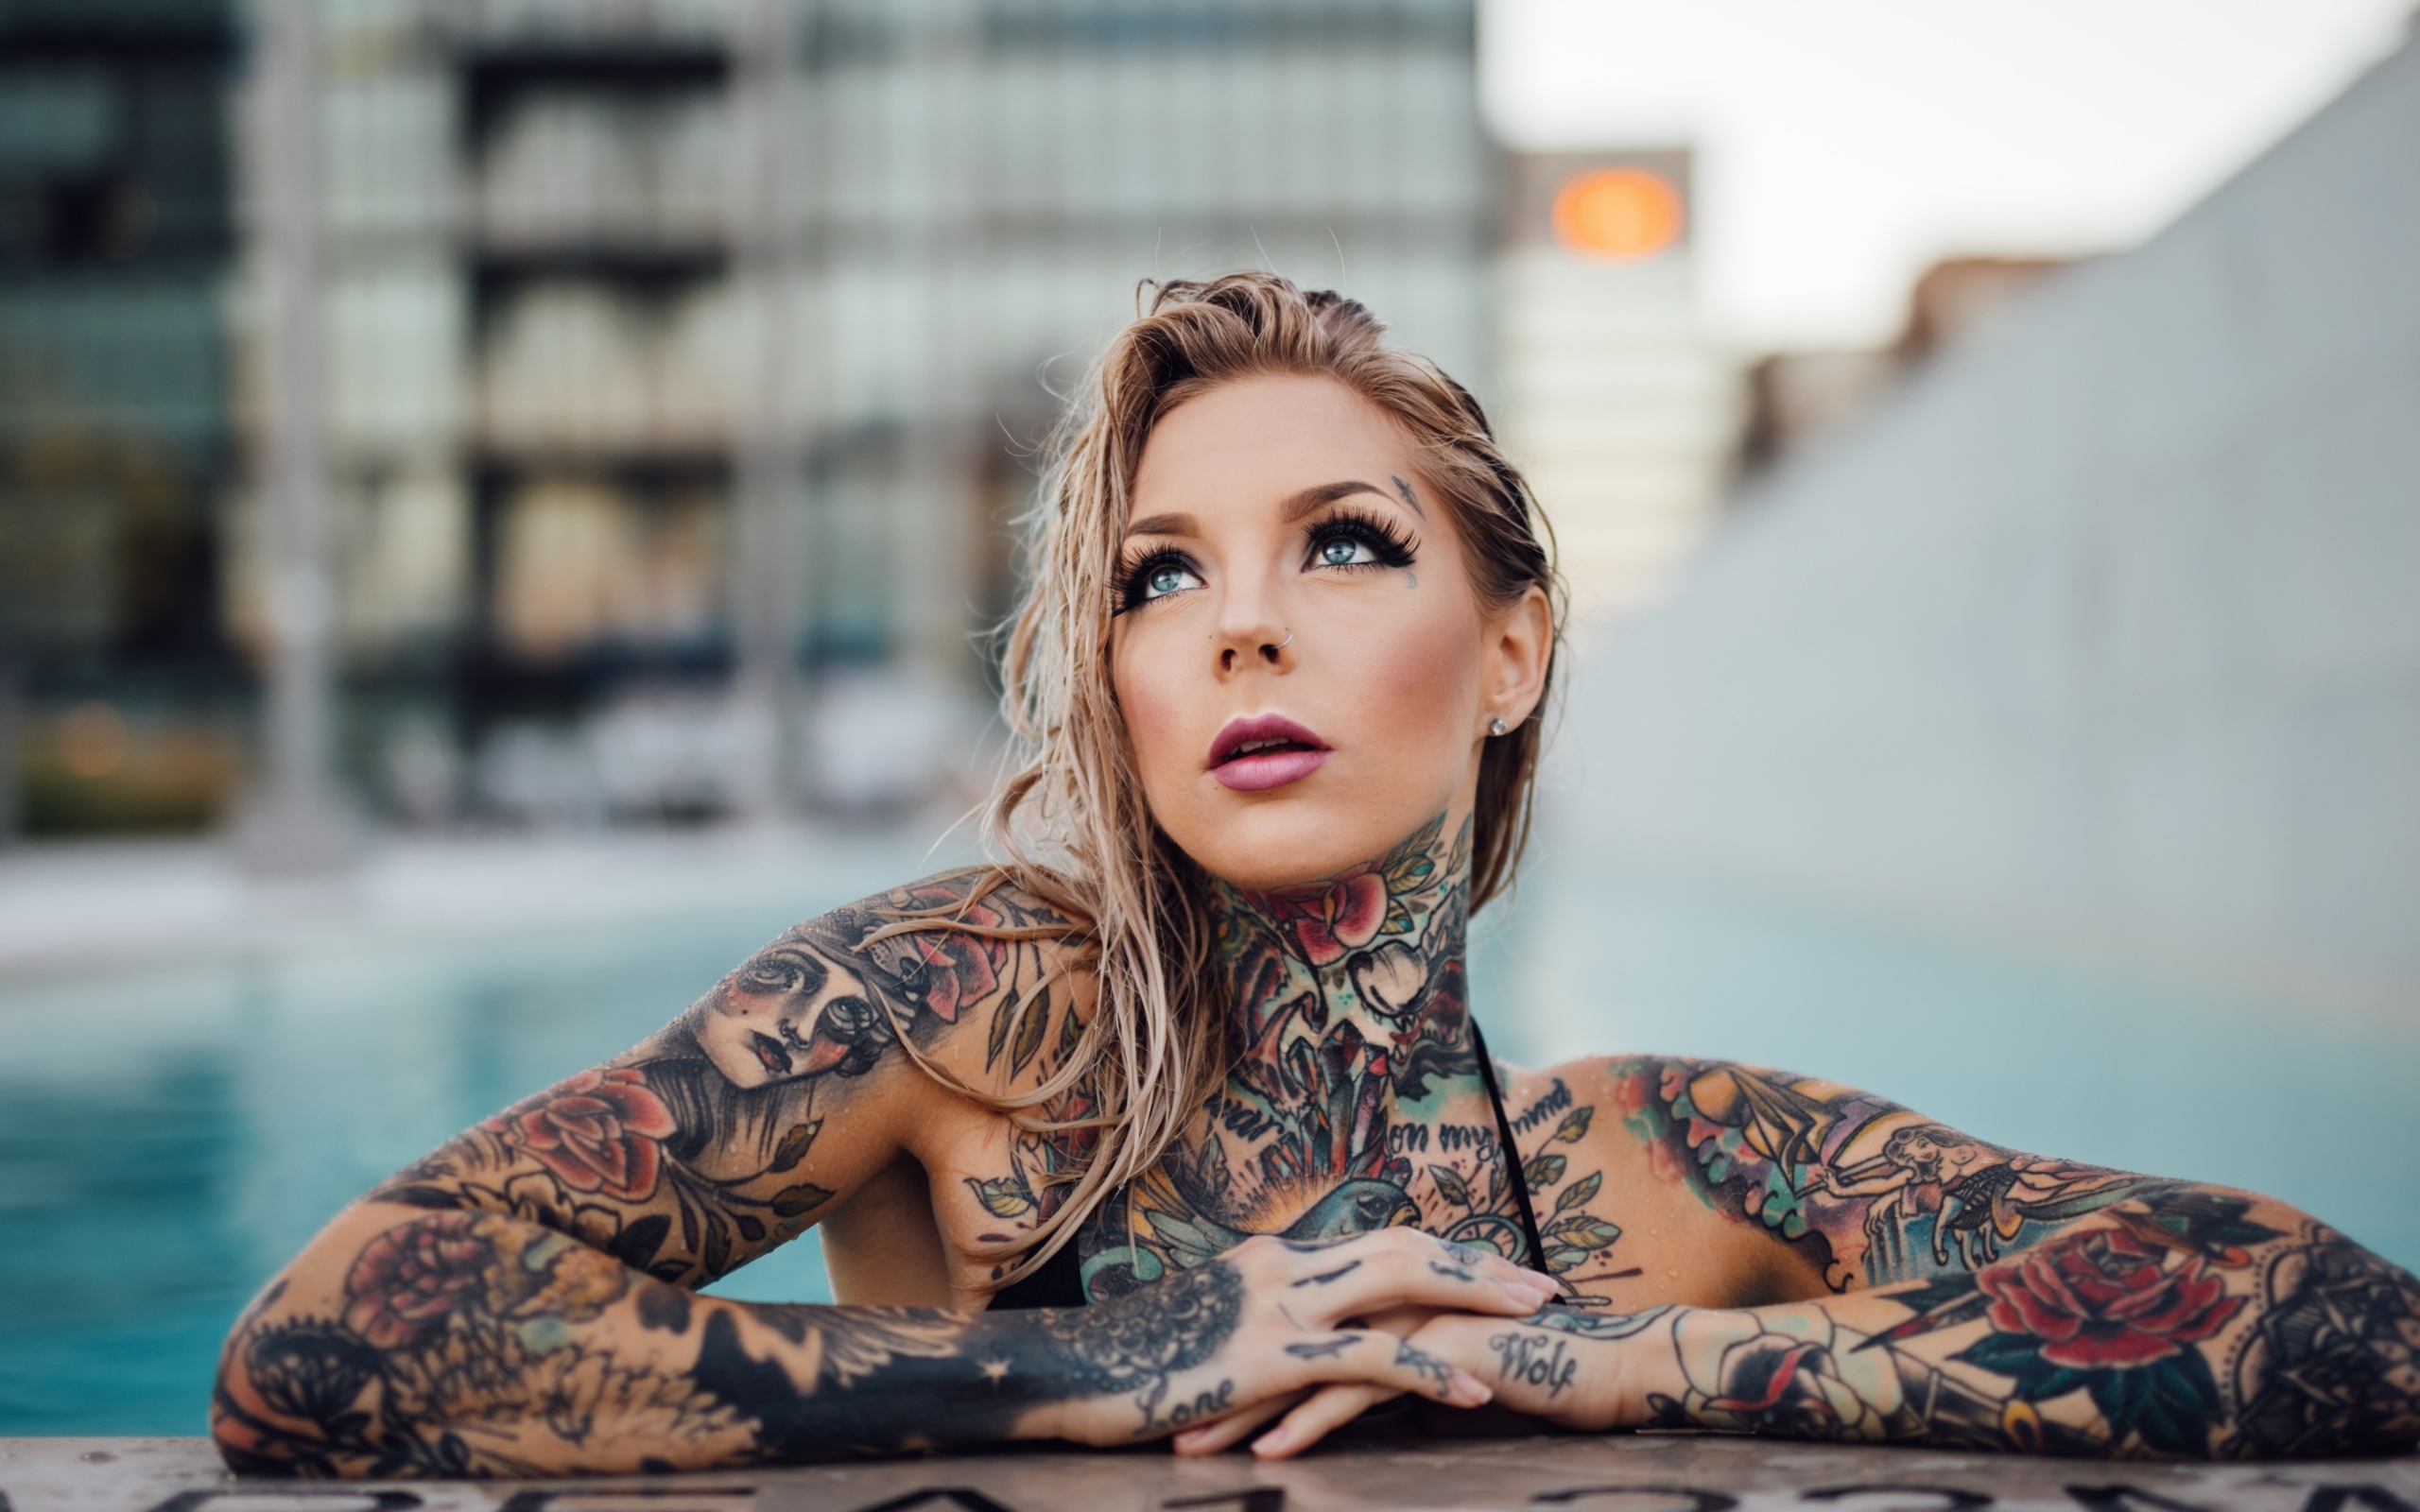 Young girl with beautiful tattoos on her body